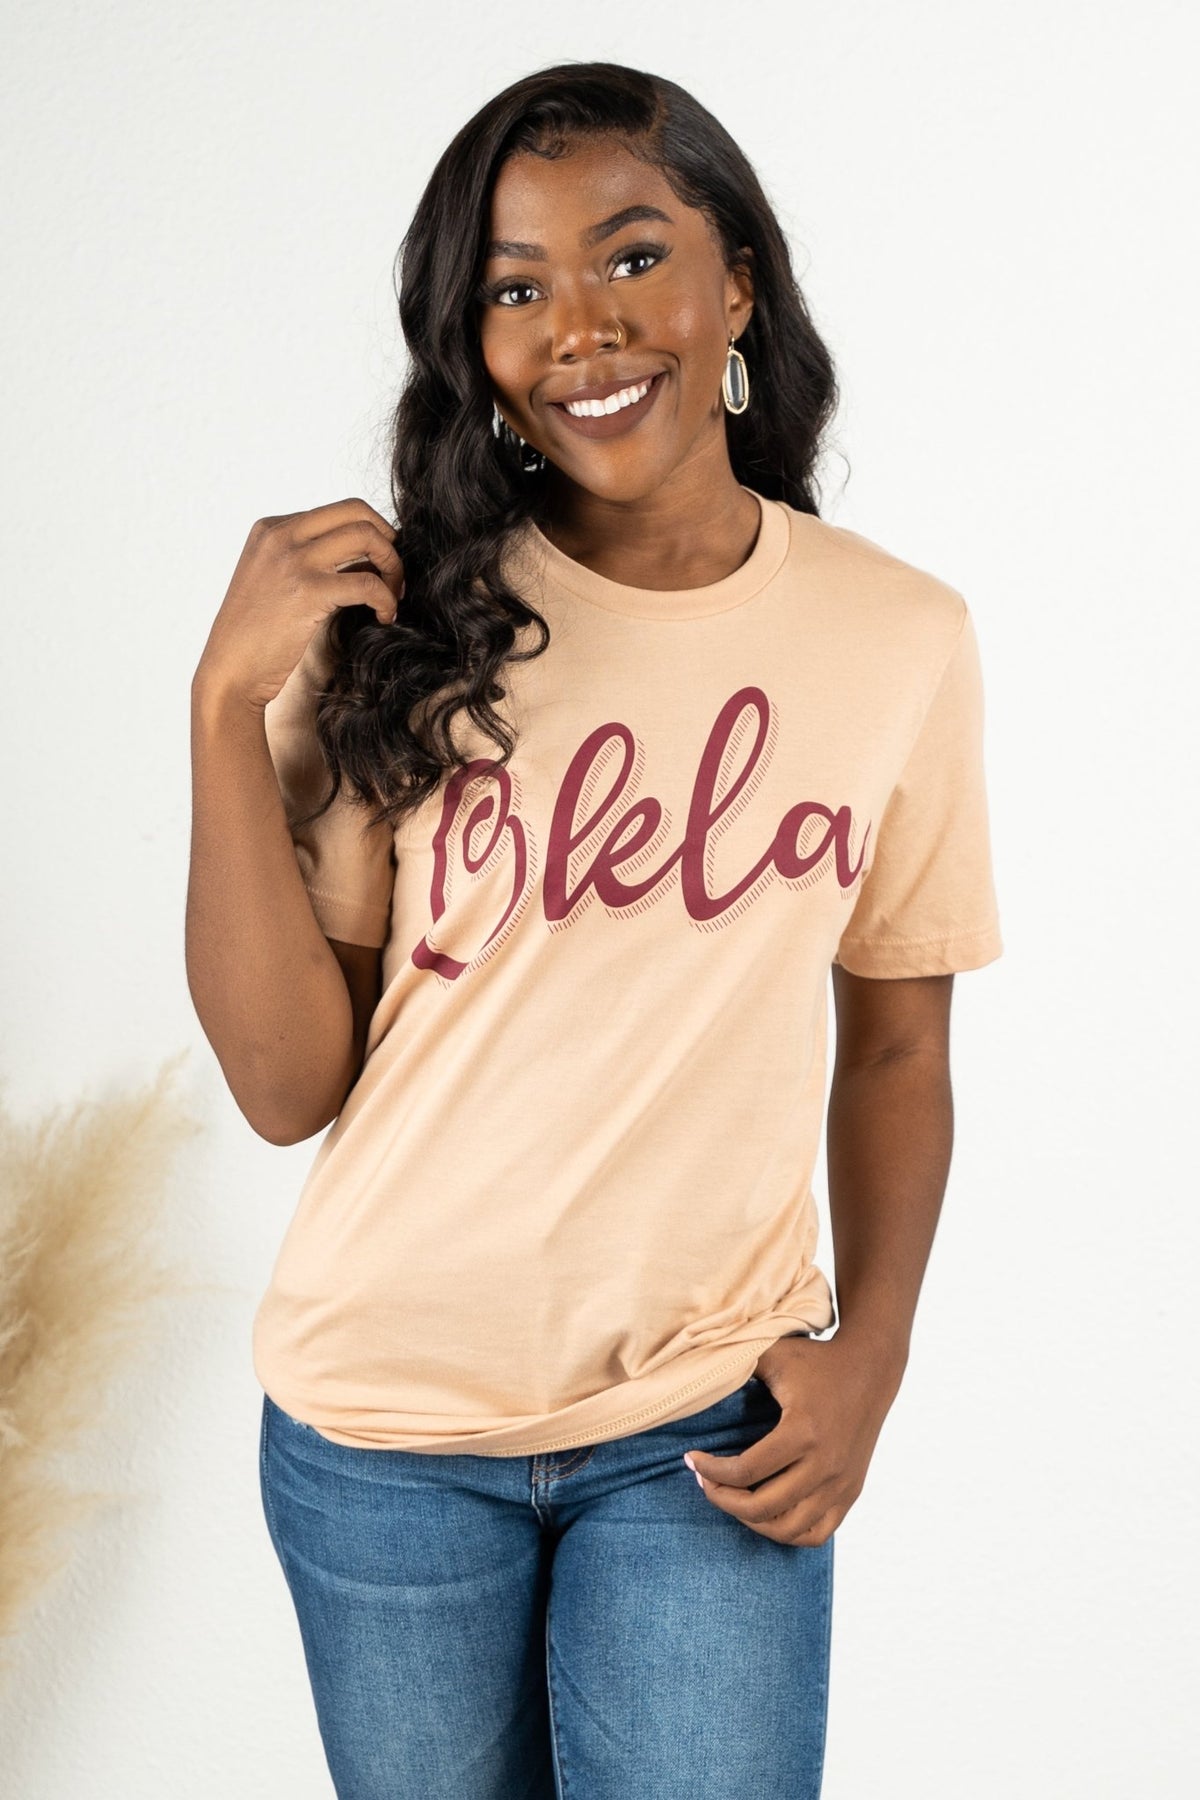 Okla shadow script t-shirt sand - Cute T-shirts - Trendy Graphic T-Shirts at Lush Fashion Lounge Boutique in Oklahoma City